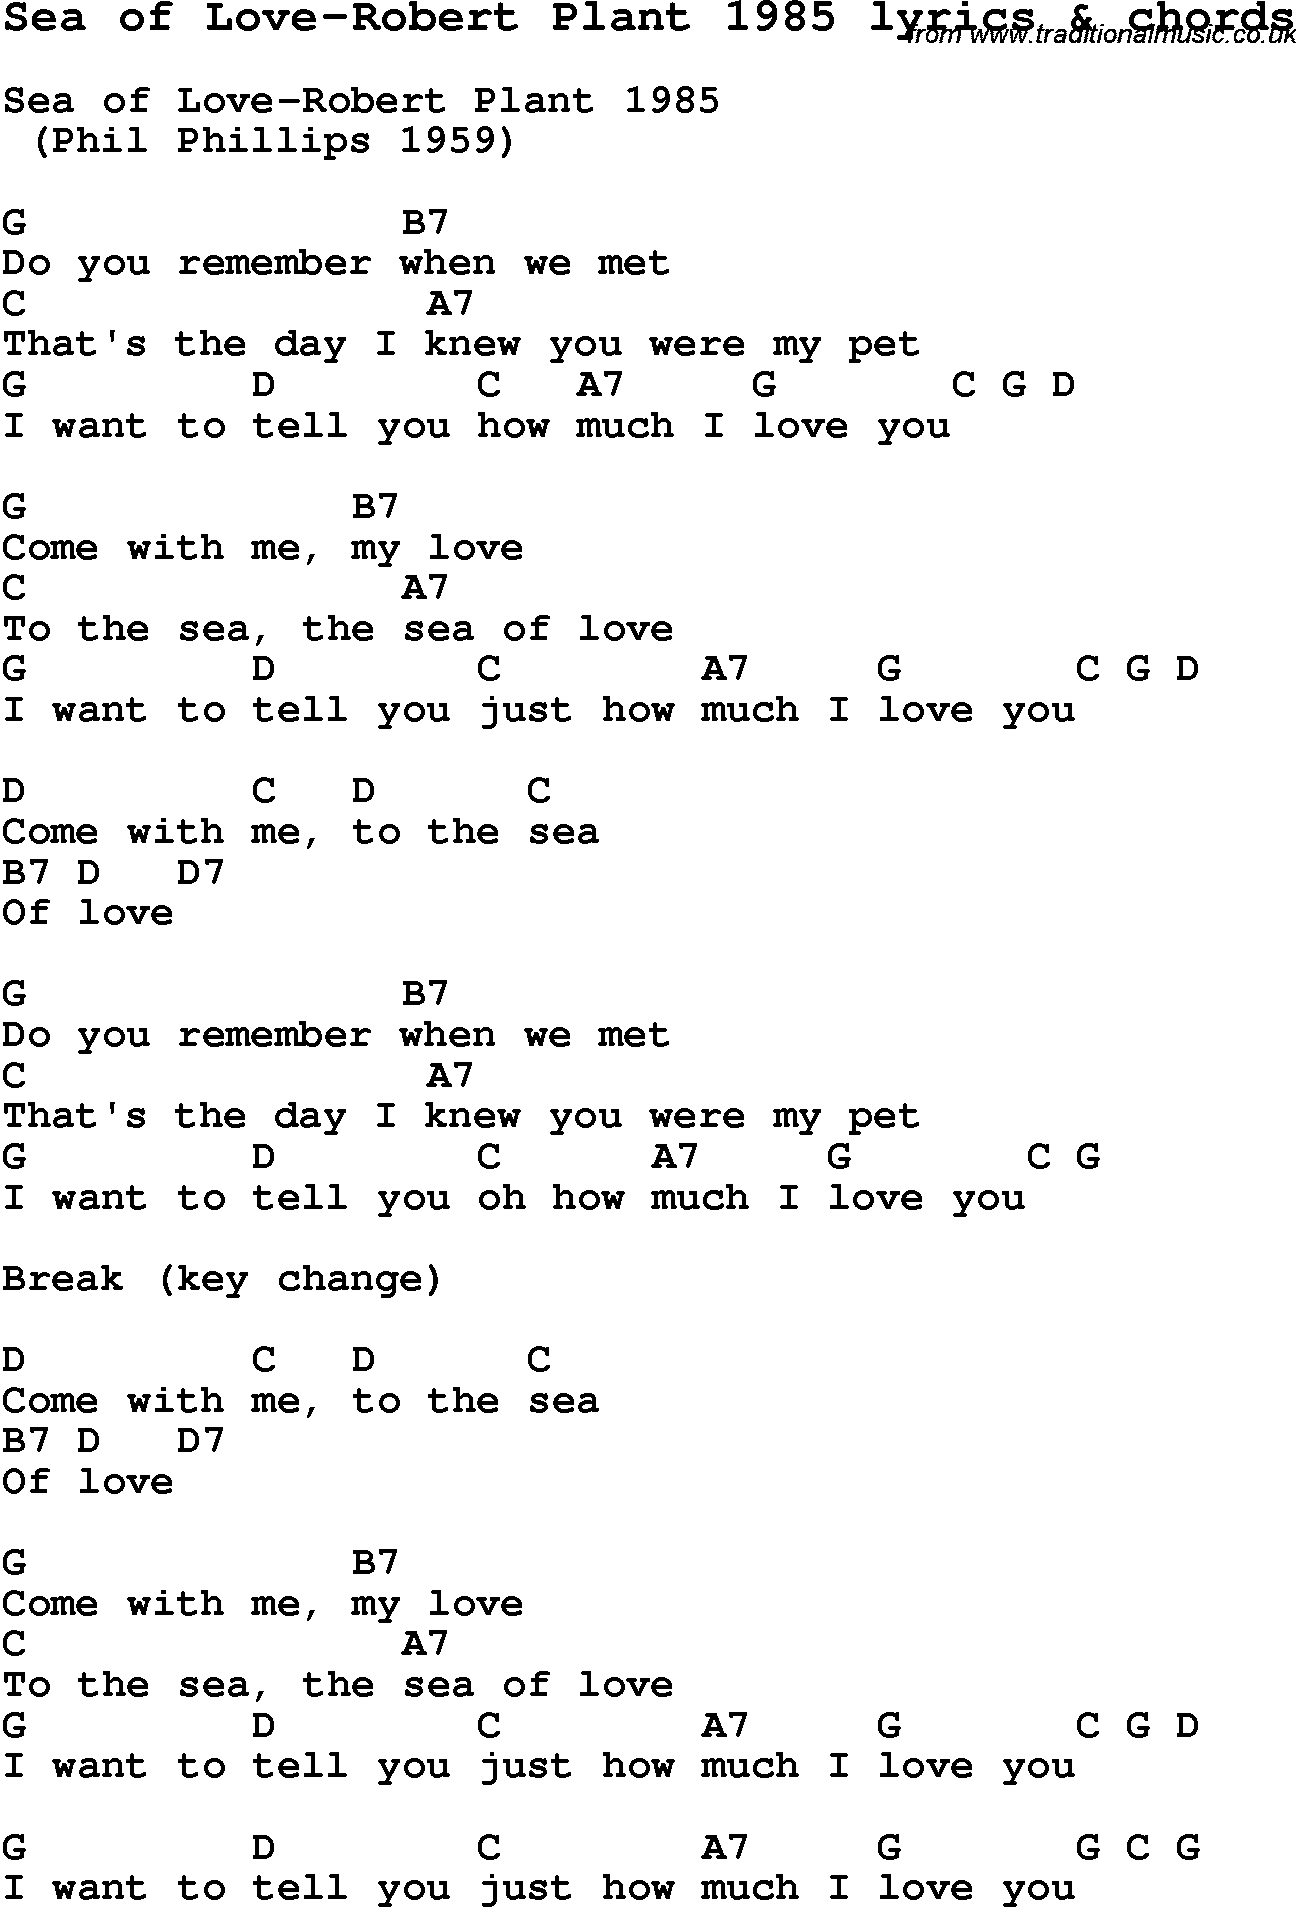 Sea Of Love Chords Love Song Lyrics Forsea Of Love Robert Plant 1985 With Chords